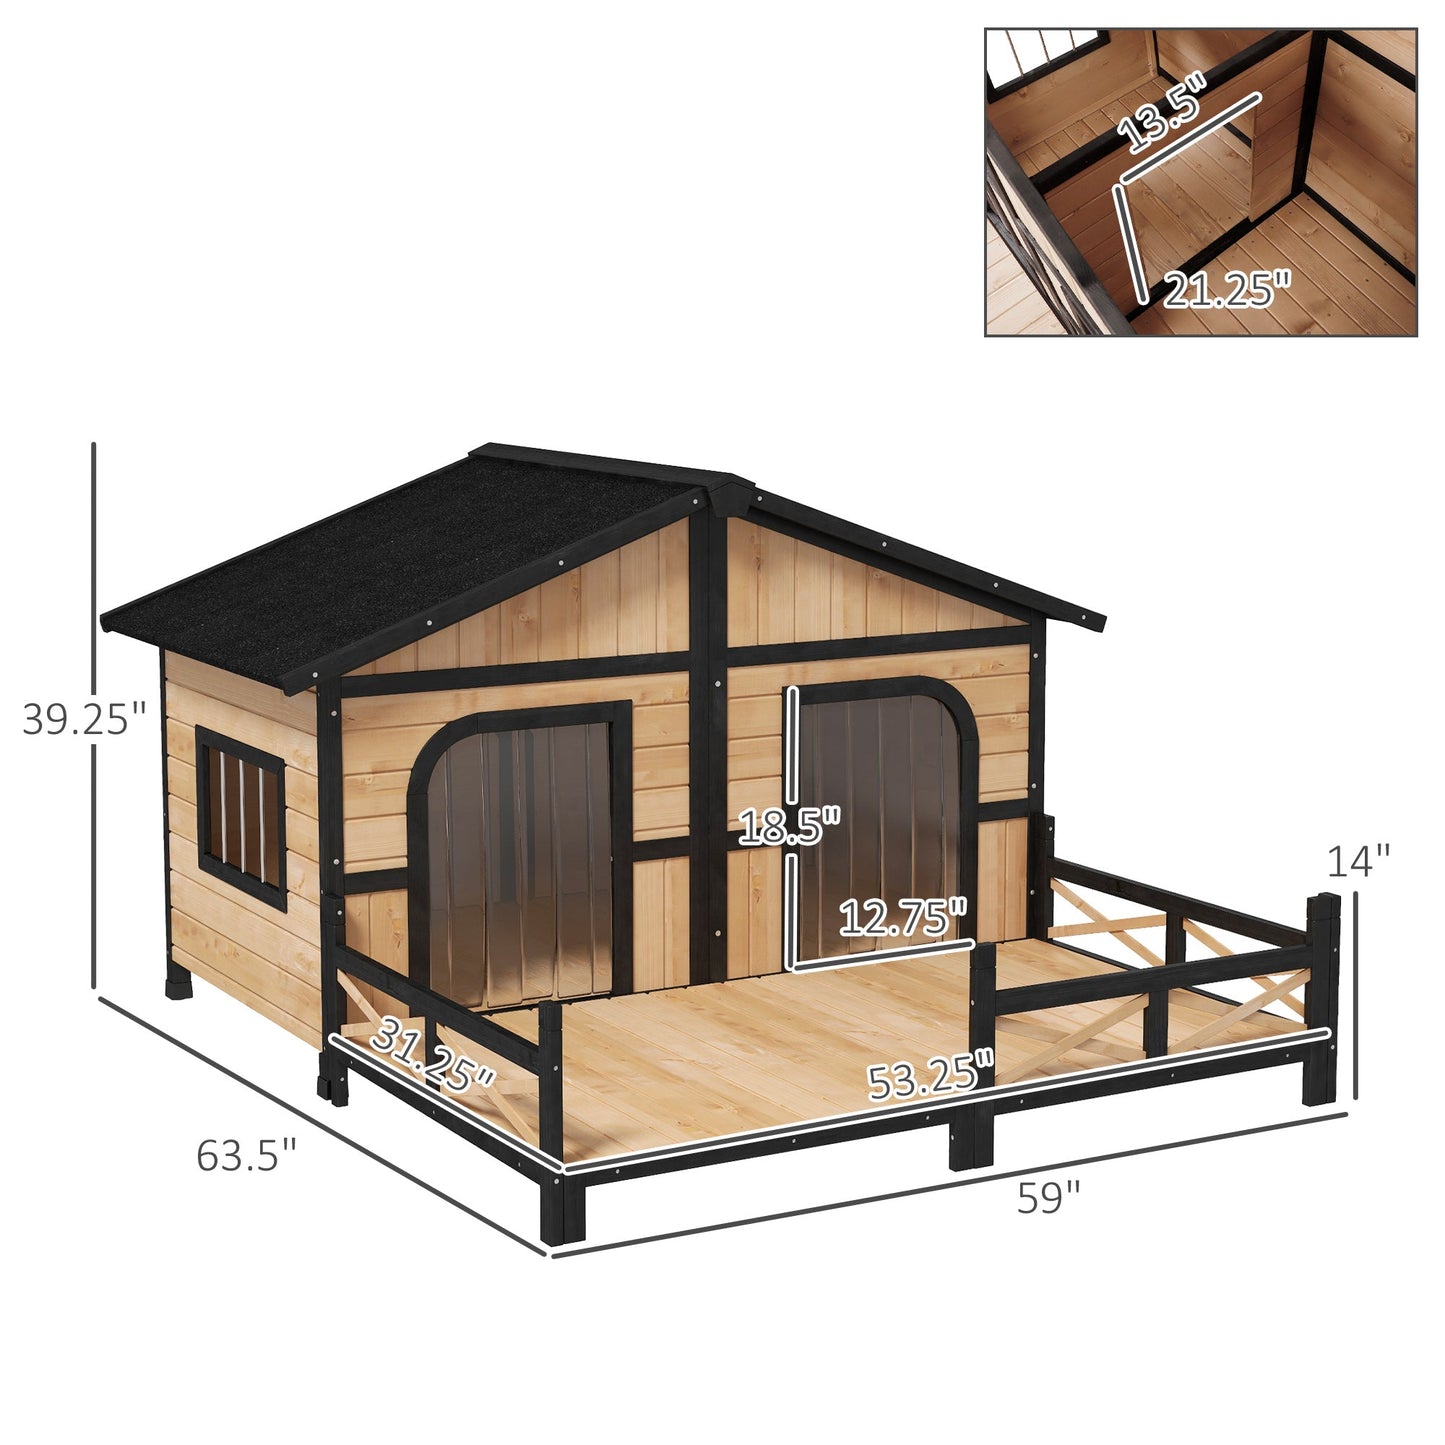 Pet Supplies-59"x64"x39" Large Wooden Dog House Raised Weatherproof Rustic Log Cabin Style Elevated Pet Shelter Porch Deck, Natural - Outdoor Style Company